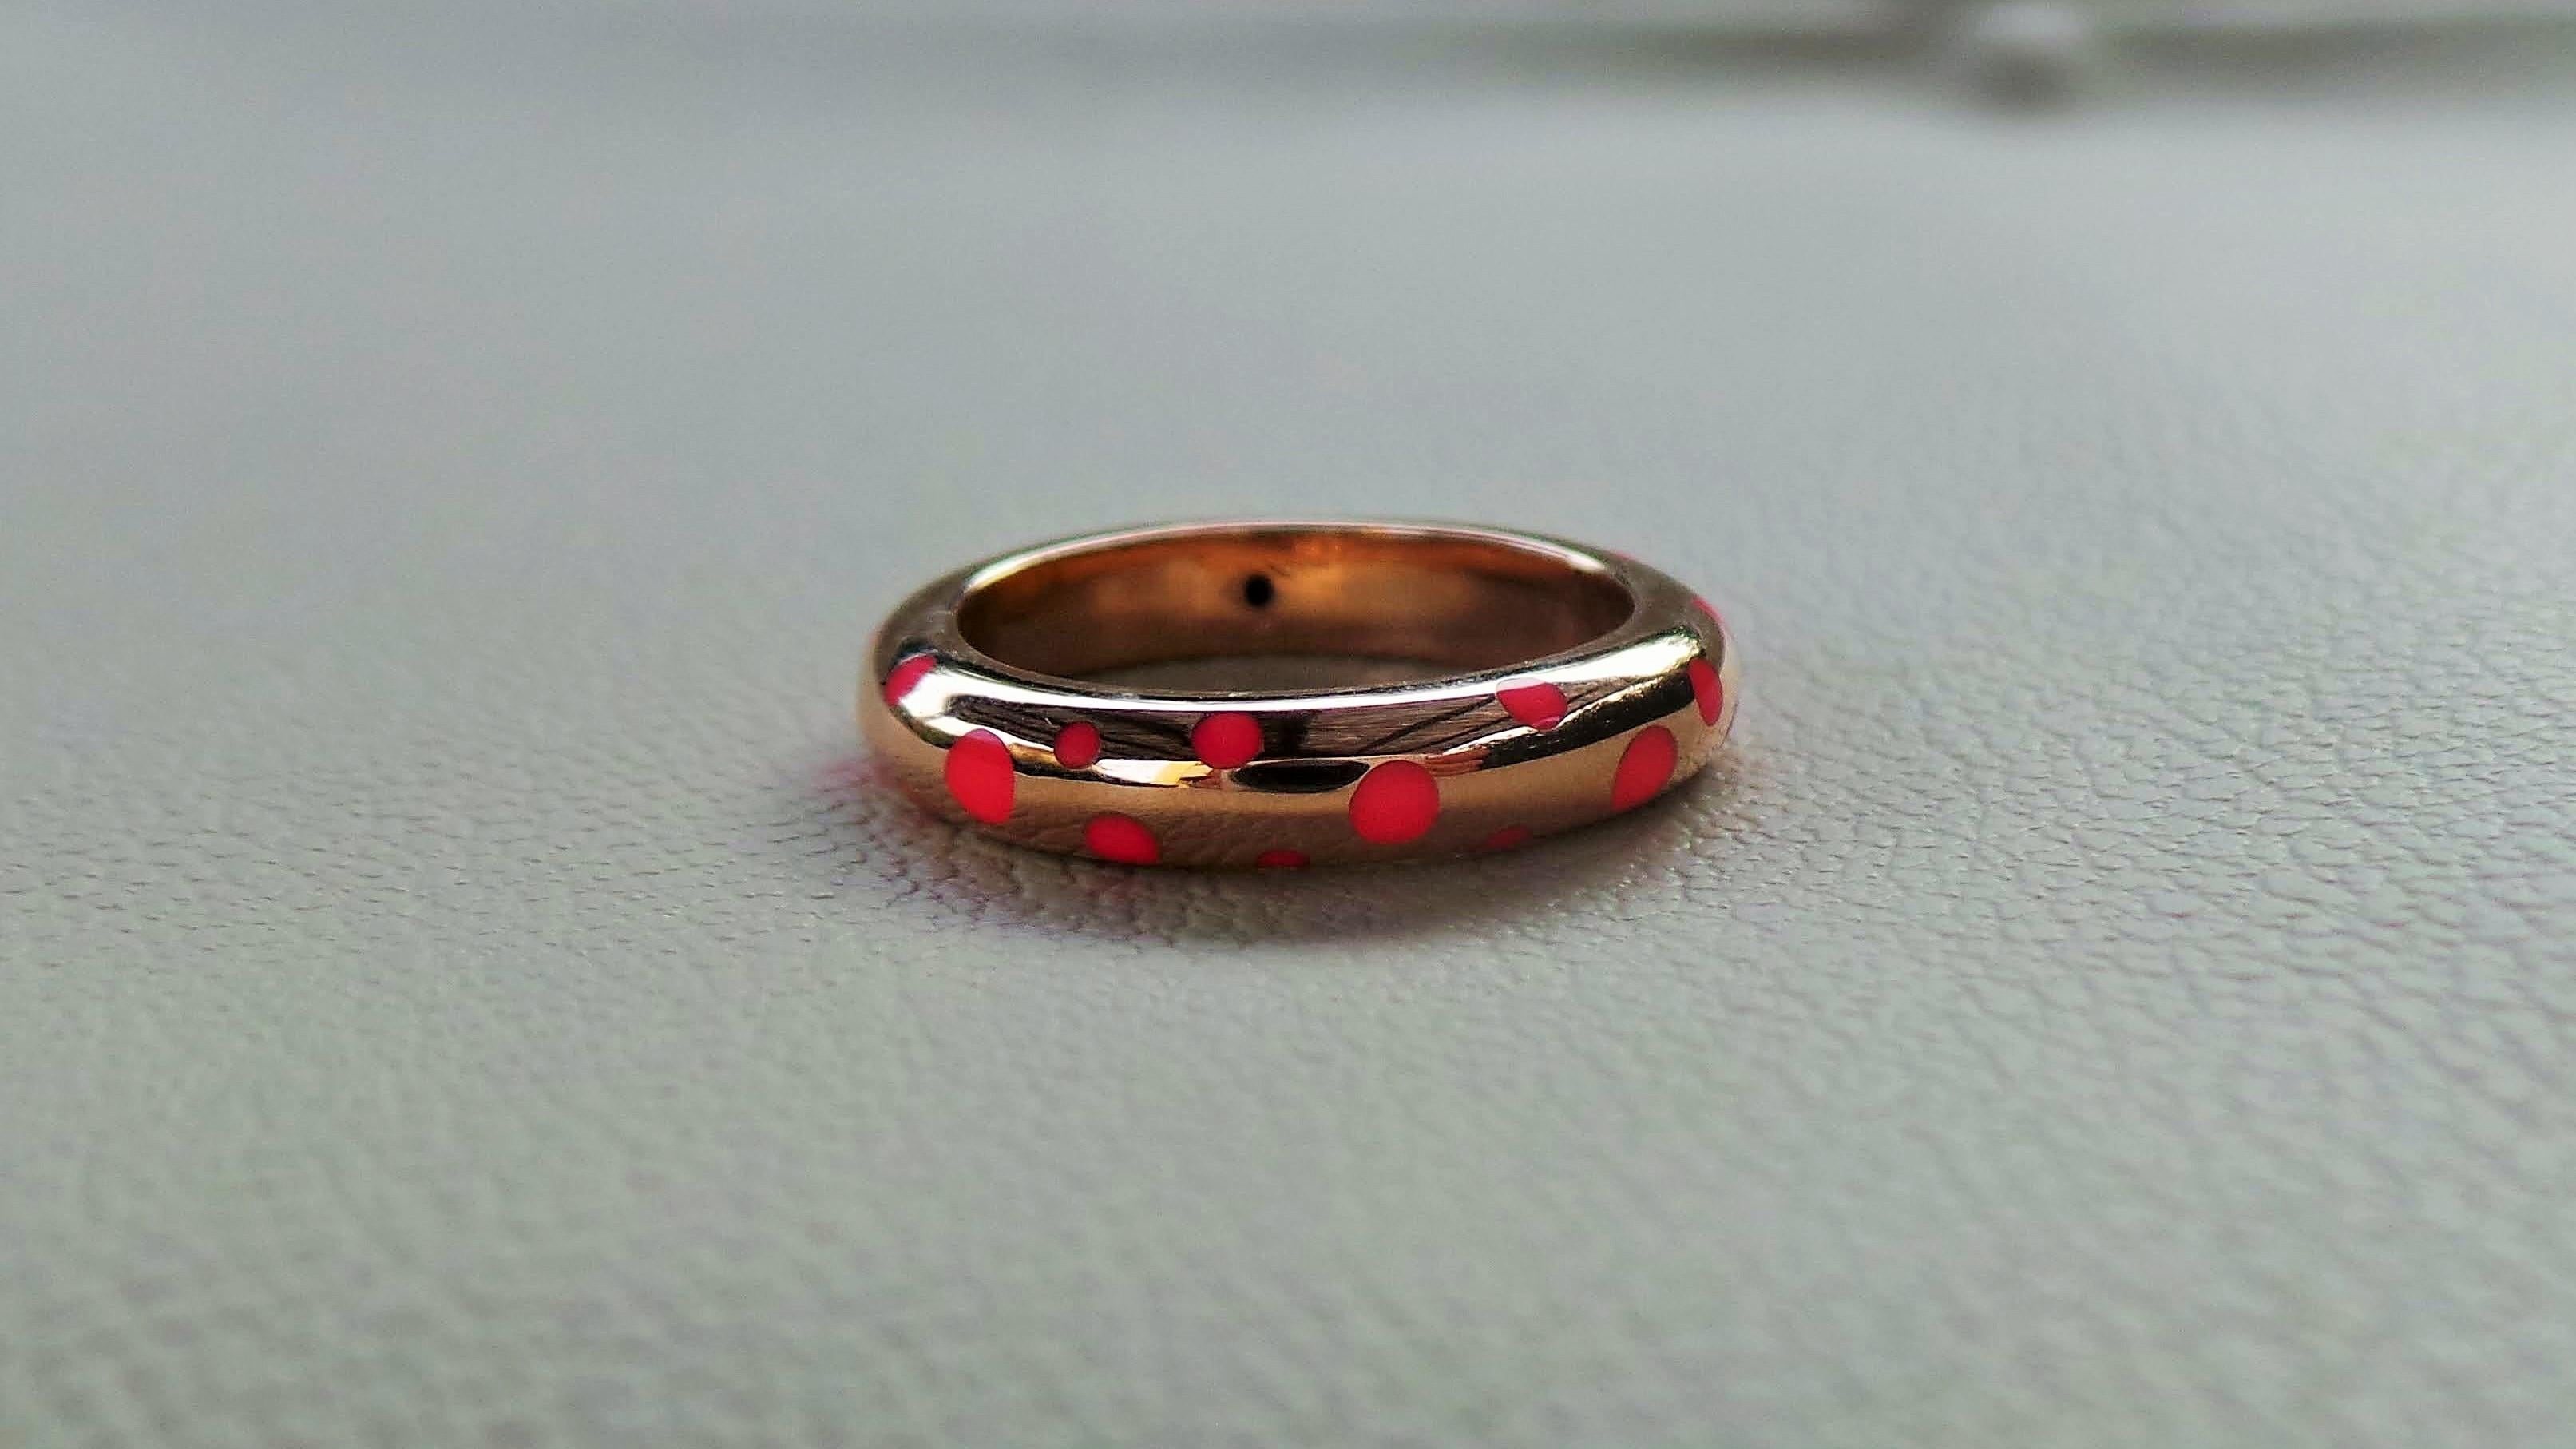 Andrea Macinai create a dedicated collection for stackable rings with enamel disegn.
Ring with clean and modern lines ,one line in rose gold. 
We're a workshop so every piece is handmade, customizable and resizable. Feel free to contact us for any